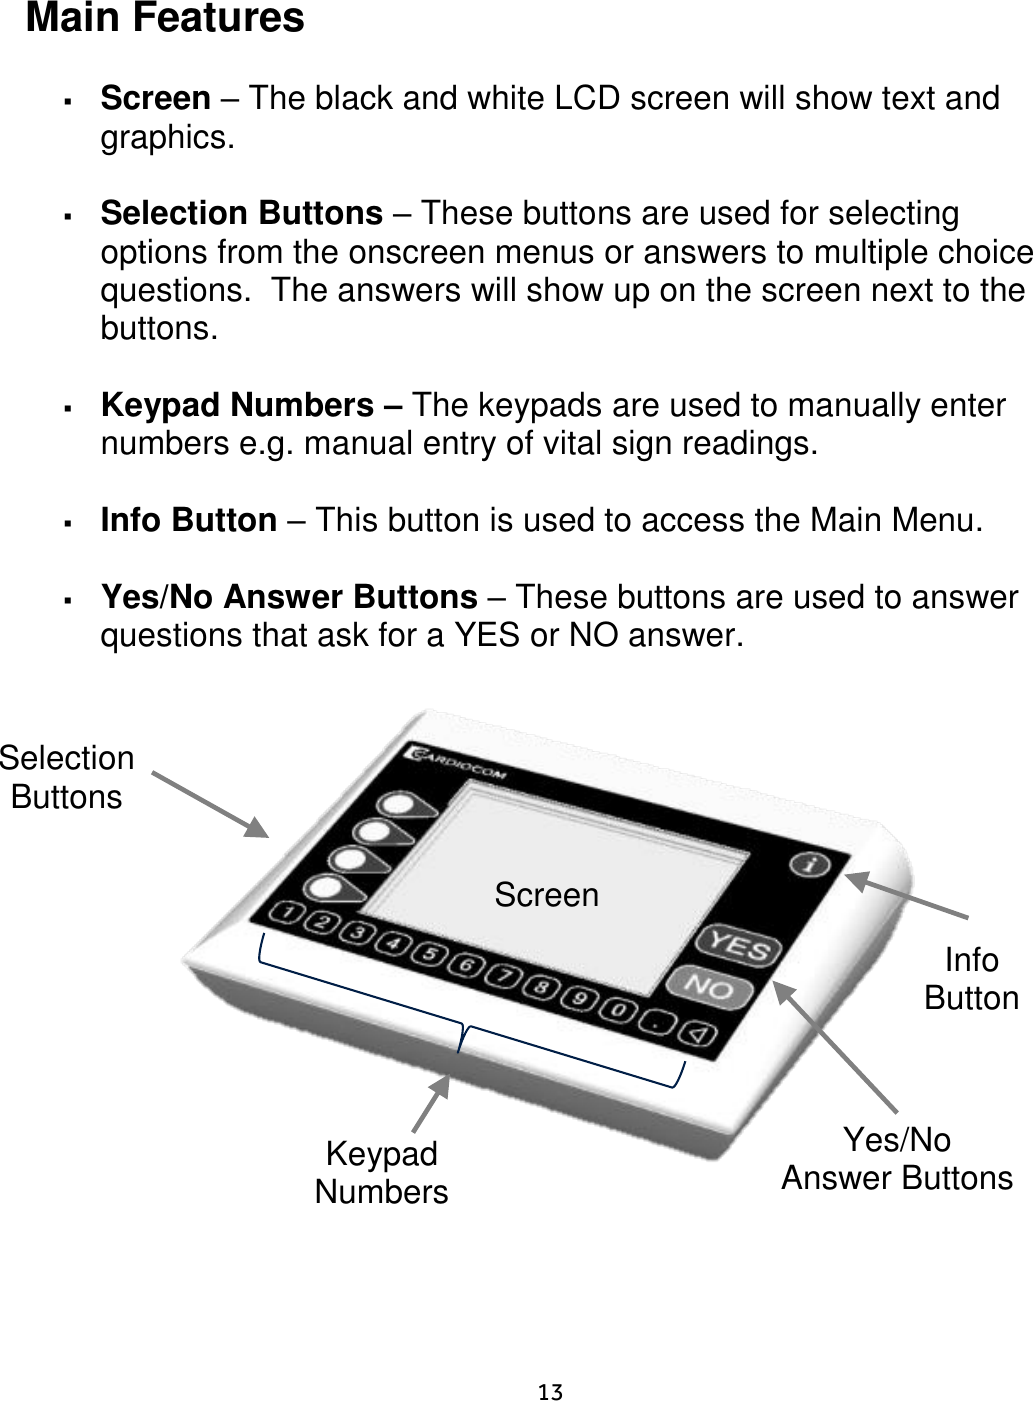     13   Main Features   Screen – The black and white LCD screen will show text and graphics.     Selection Buttons – These buttons are used for selecting options from the onscreen menus or answers to multiple choice questions.  The answers will show up on the screen next to the buttons.   Keypad Numbers – The keypads are used to manually enter numbers e.g. manual entry of vital sign readings.    Info Button – This button is used to access the Main Menu.    Yes/No Answer Buttons – These buttons are used to answer questions that ask for a YES or NO answer.                Info Button    Screen Yes/No Answer Buttons Selection Buttons Keypad  Numbers 